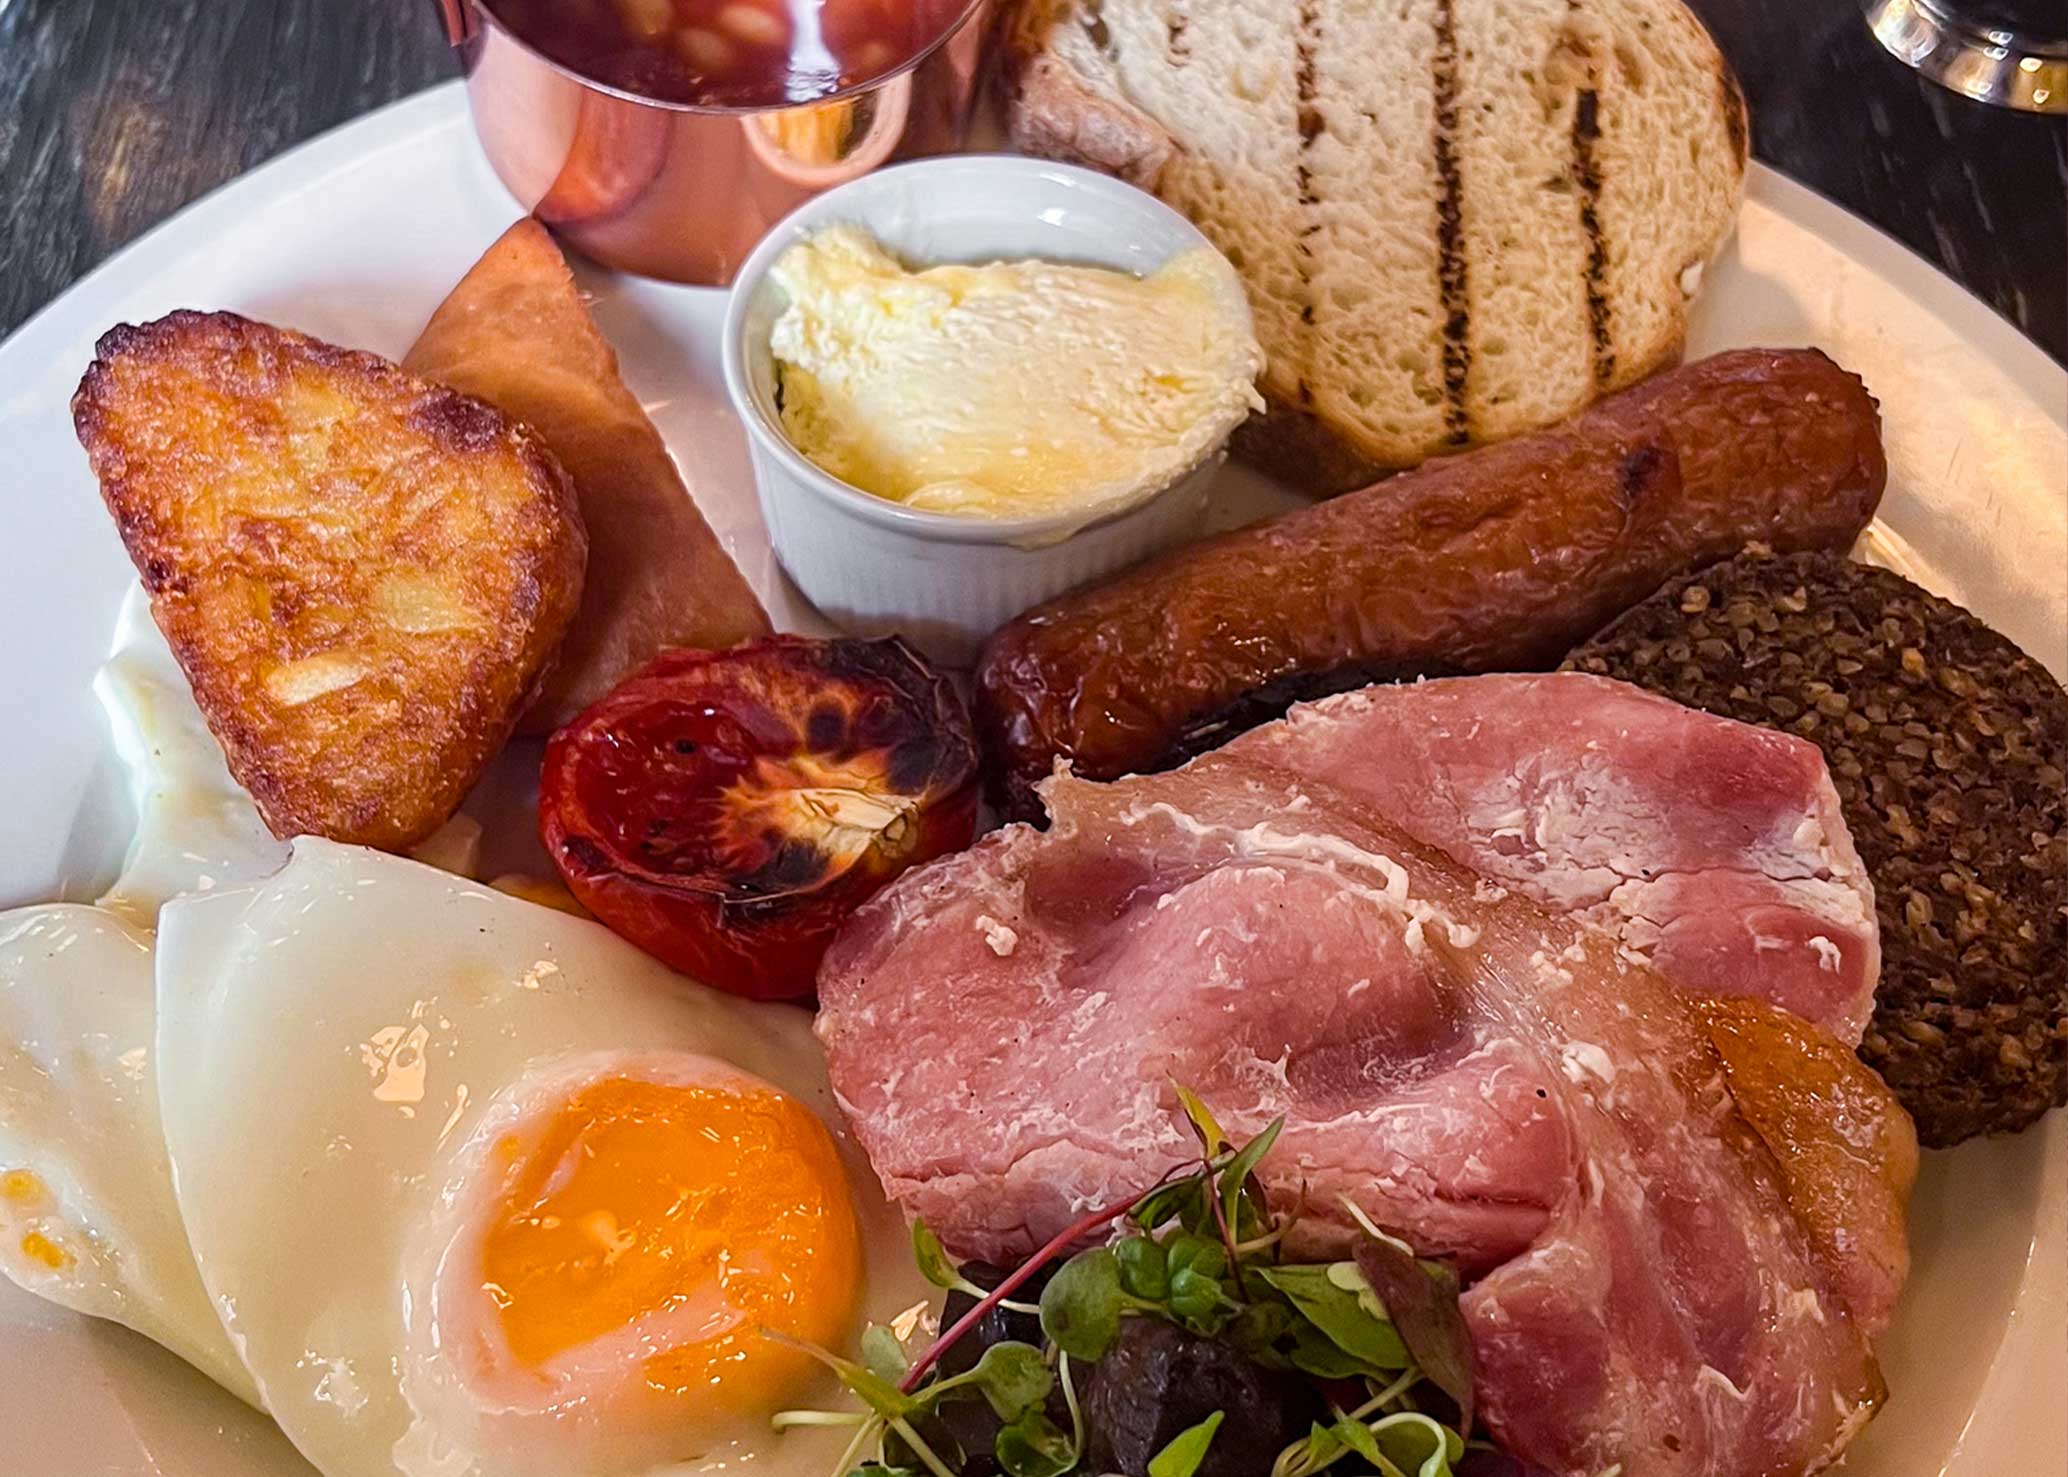 Crowded plate of full Scottish breakfast items